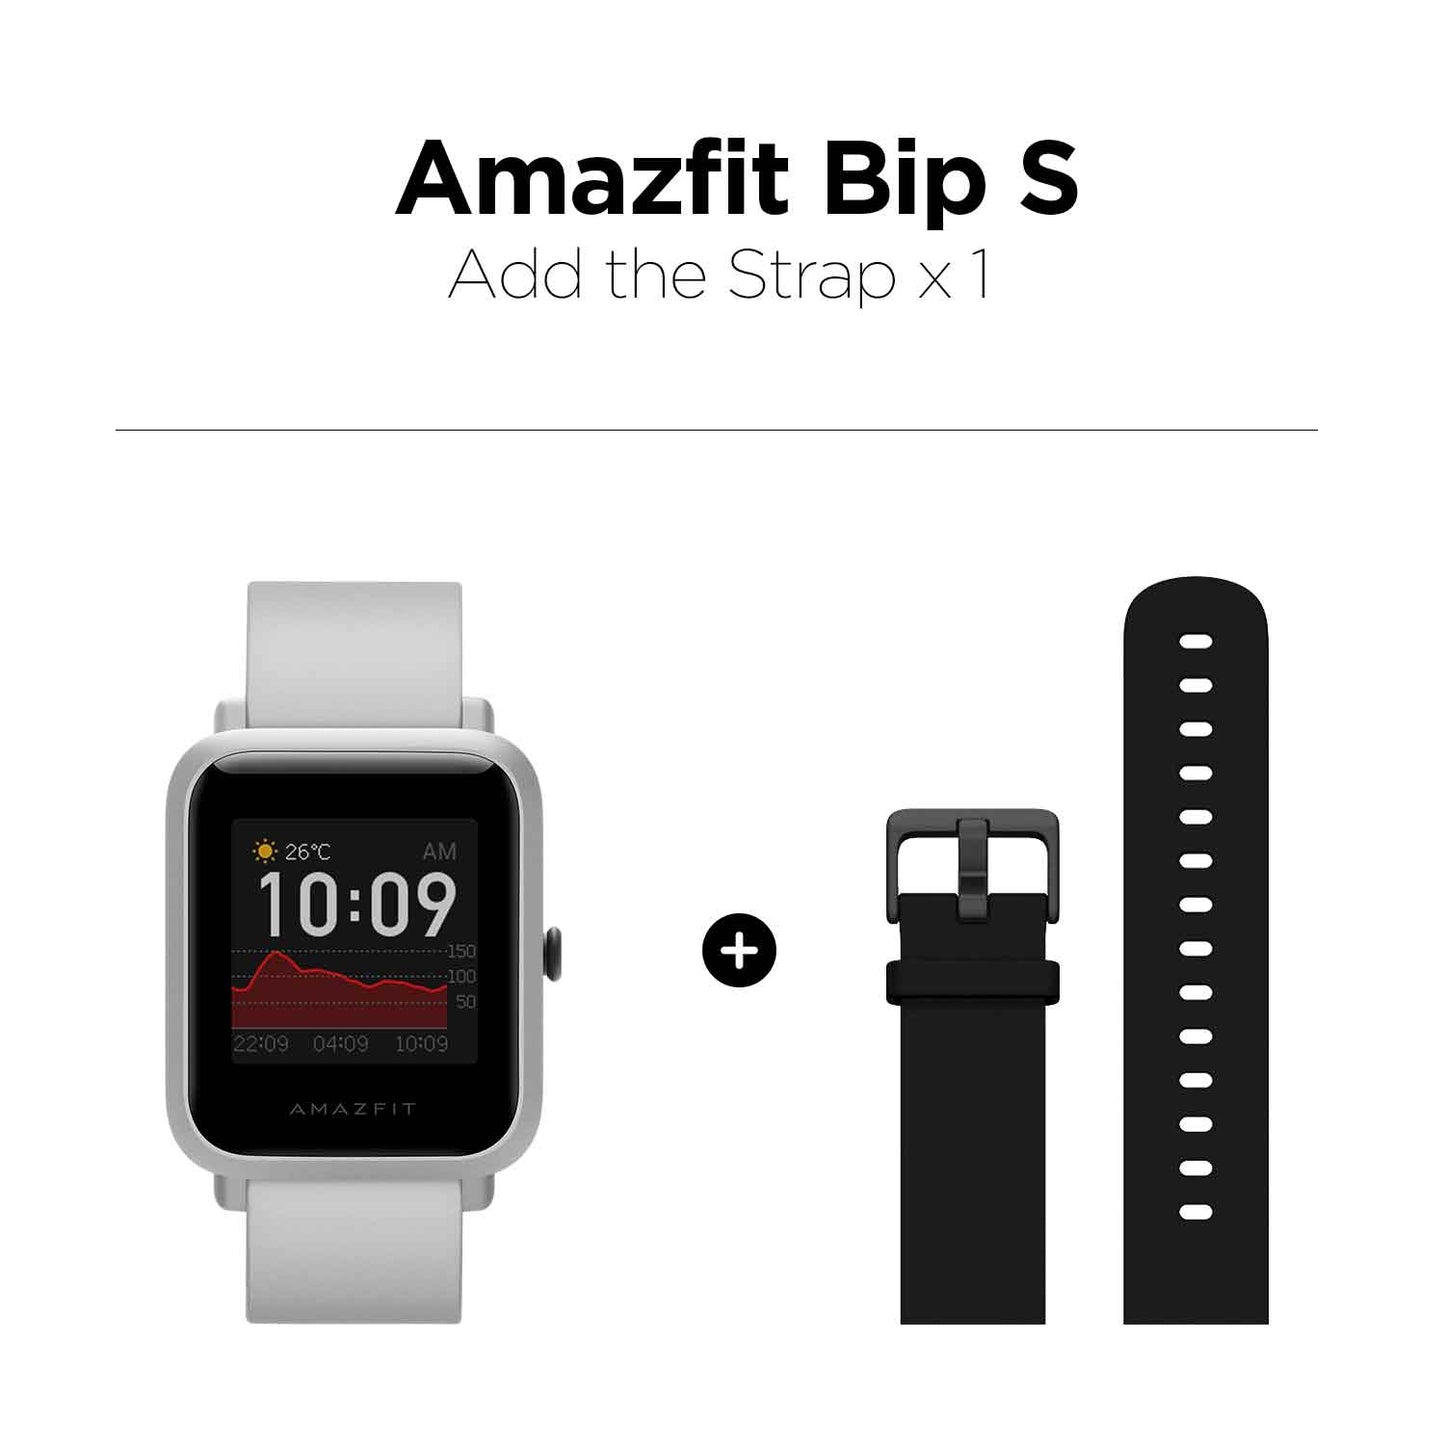 In Stock 2020 Global Amazfit Bip S Smartwatch 5ATM waterproof built in GPS GLONASS Bluetooth Smart Watch for Android iOS Phone